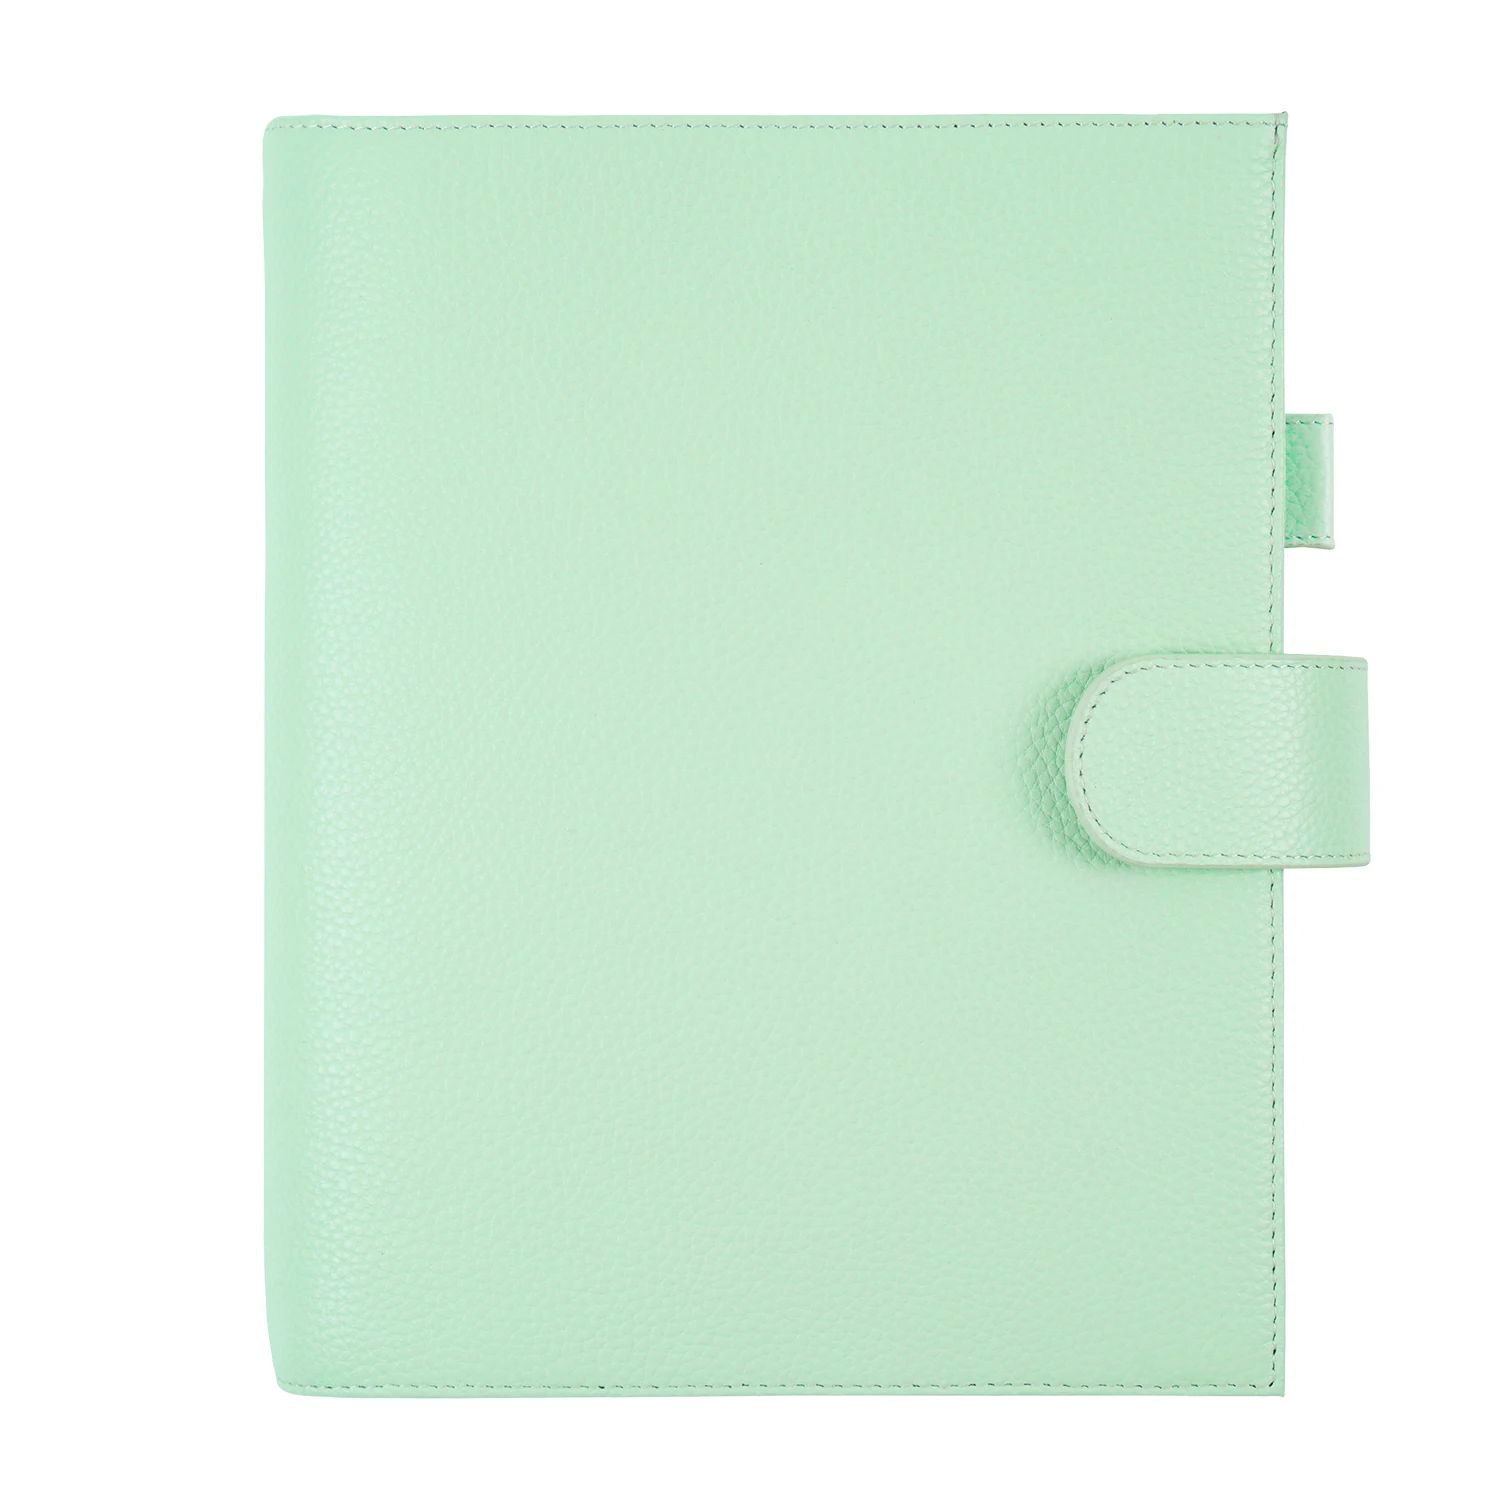 Color:Pebbled MintSize:Only Cover